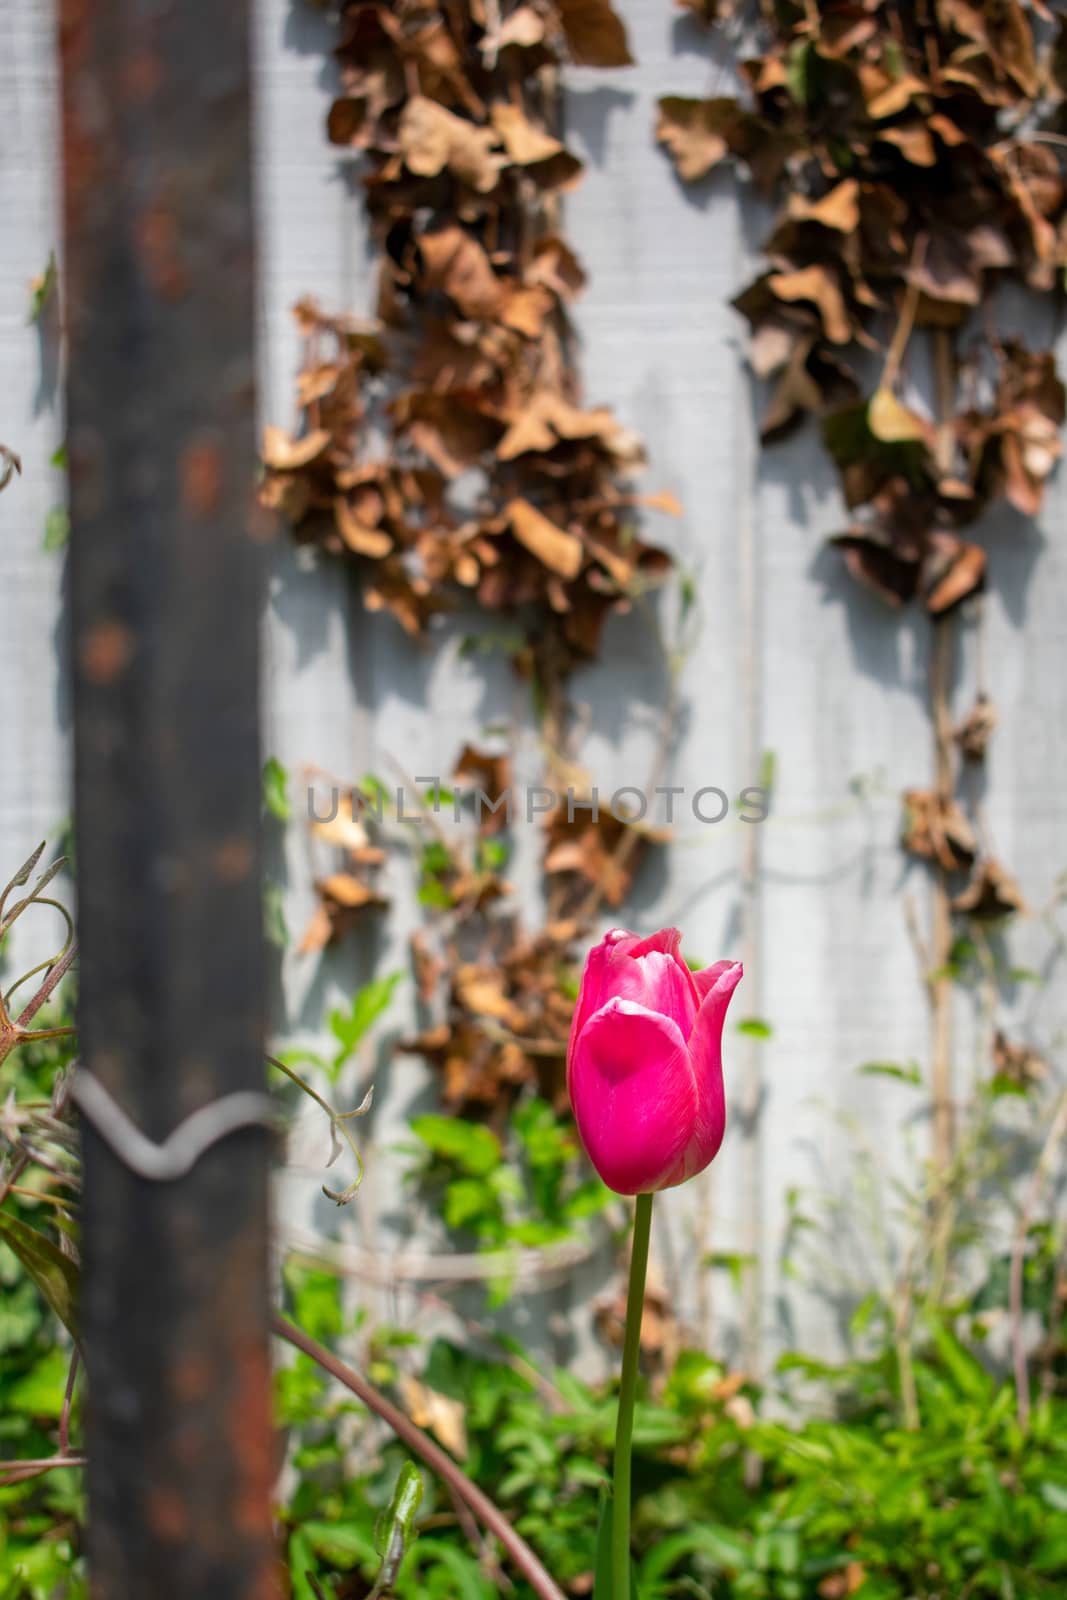 A Single Red Tulip Behind a Metal Fence With a Wall Covered in D by bju12290